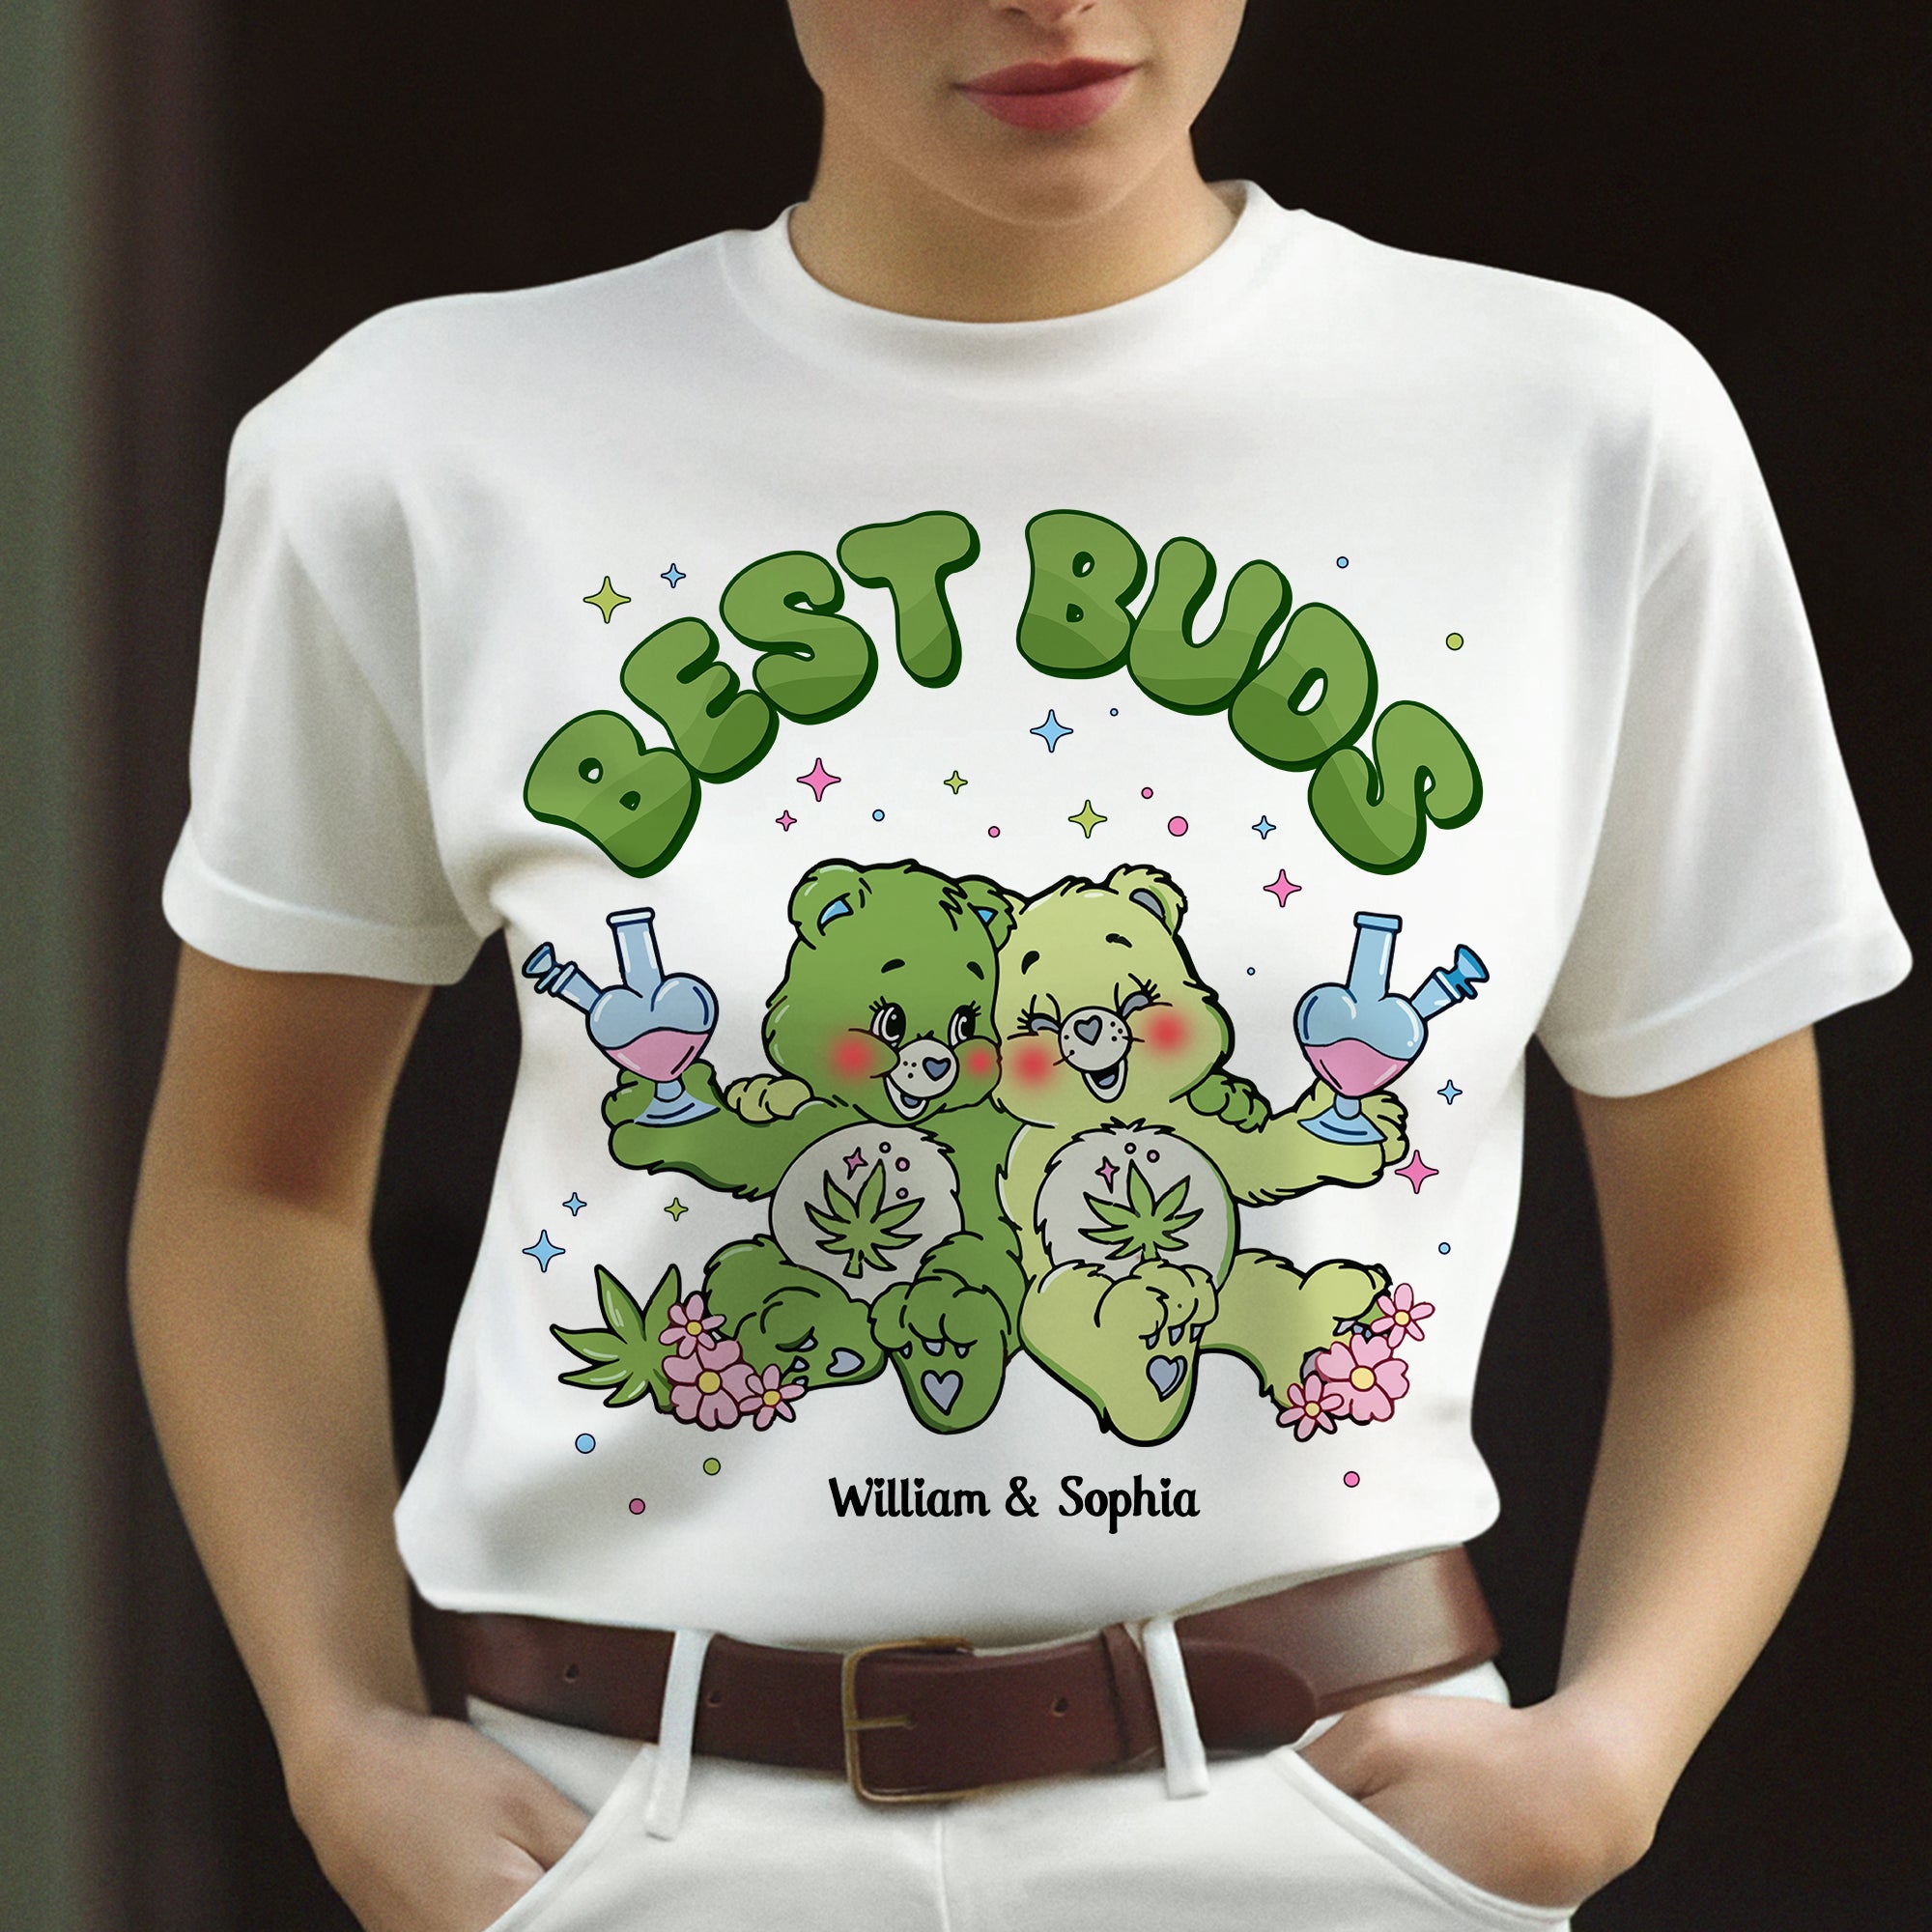 Personalized Gifts For Weed Buds Best Friends Shirt 04napu220724-Homacus